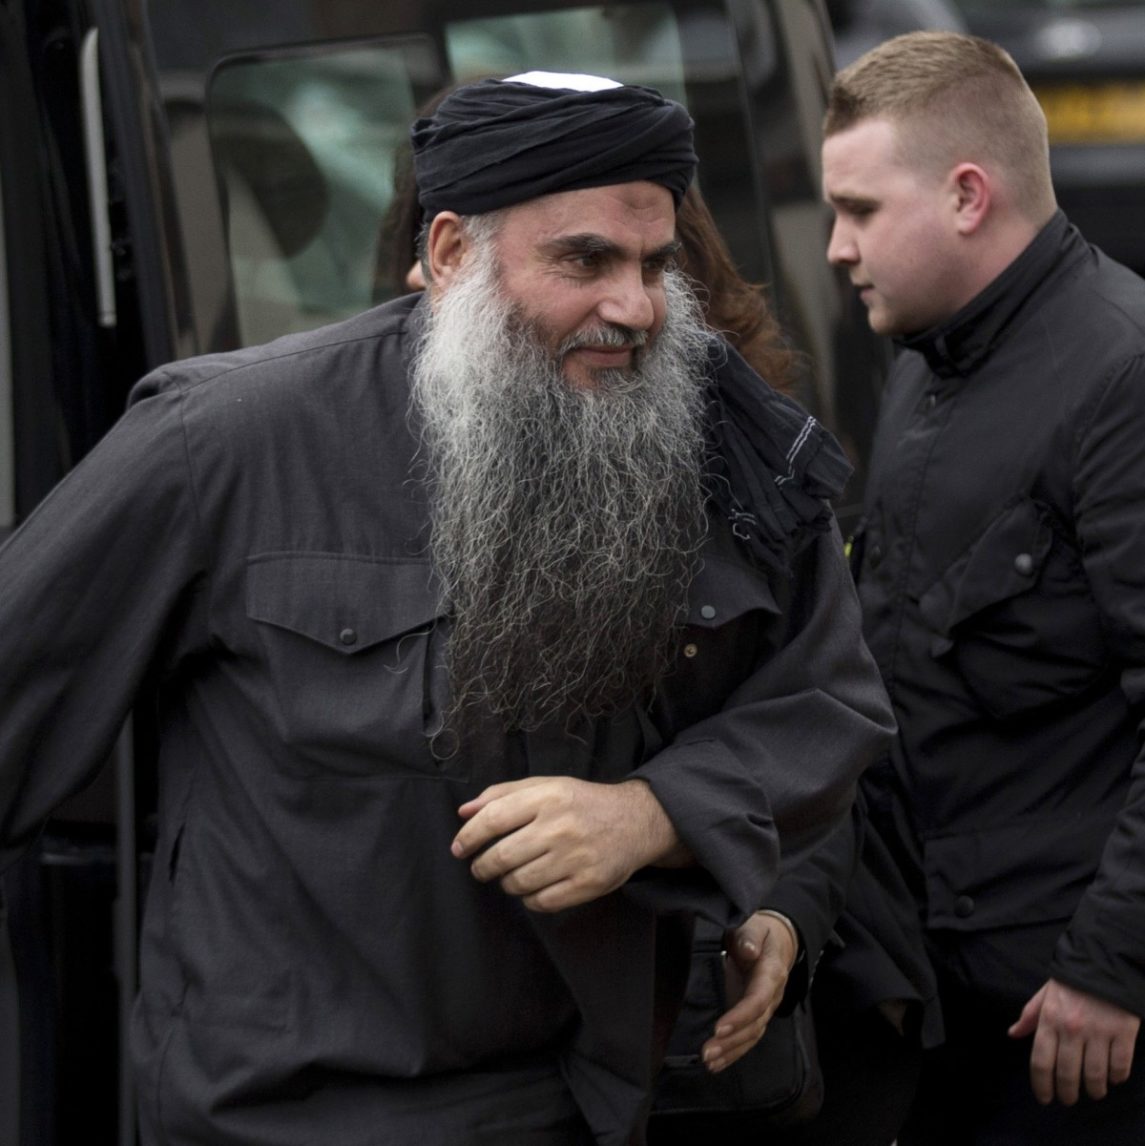 Abu Qatada Extradition: Suspected Terrorist Wins Appeal To Stay In UK, Gets Bail